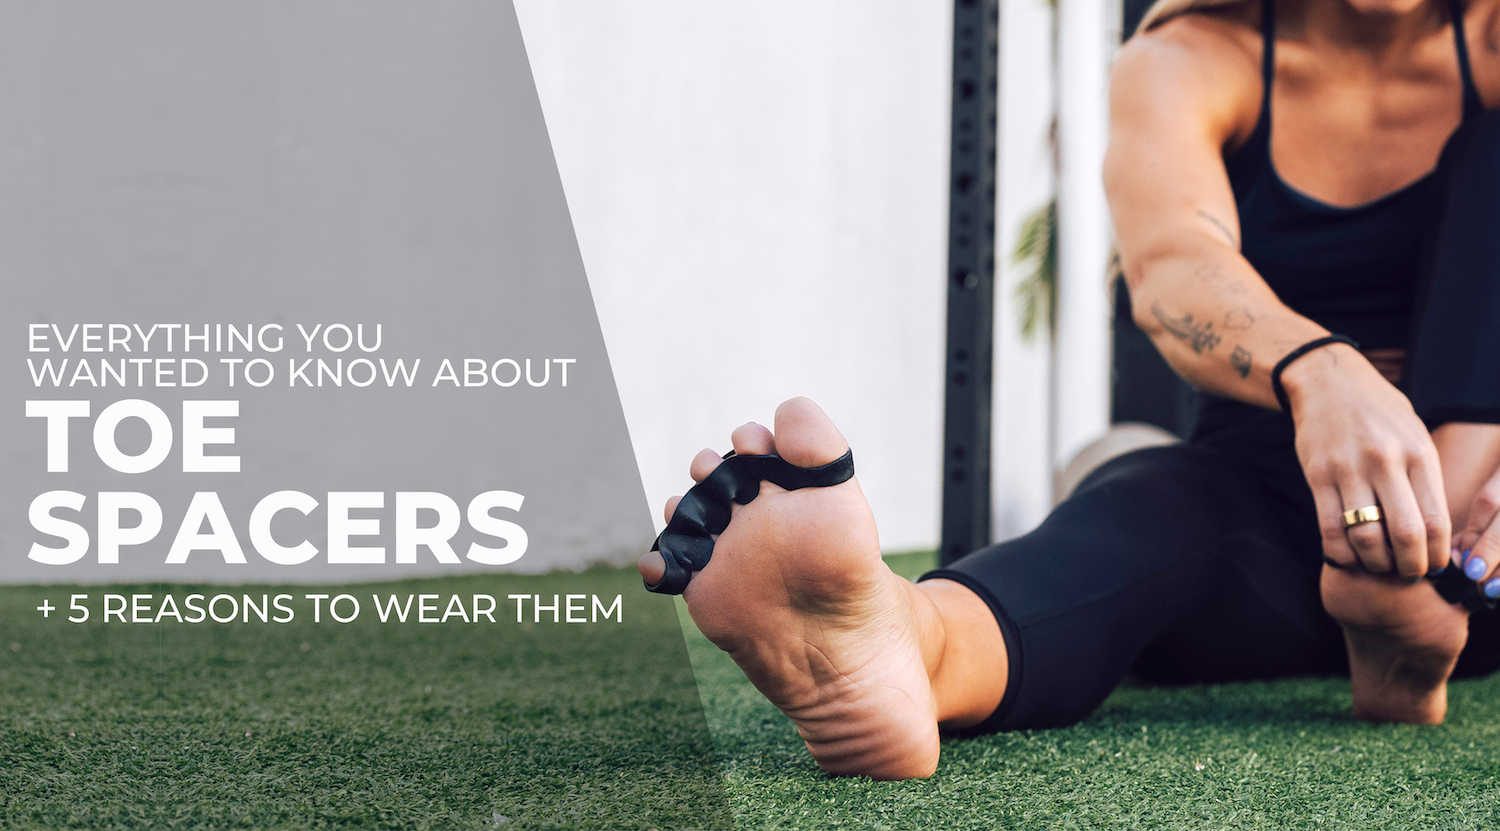 Everything You Wanted to Know About Toe Spacers (+ 5 reasons to wear them)